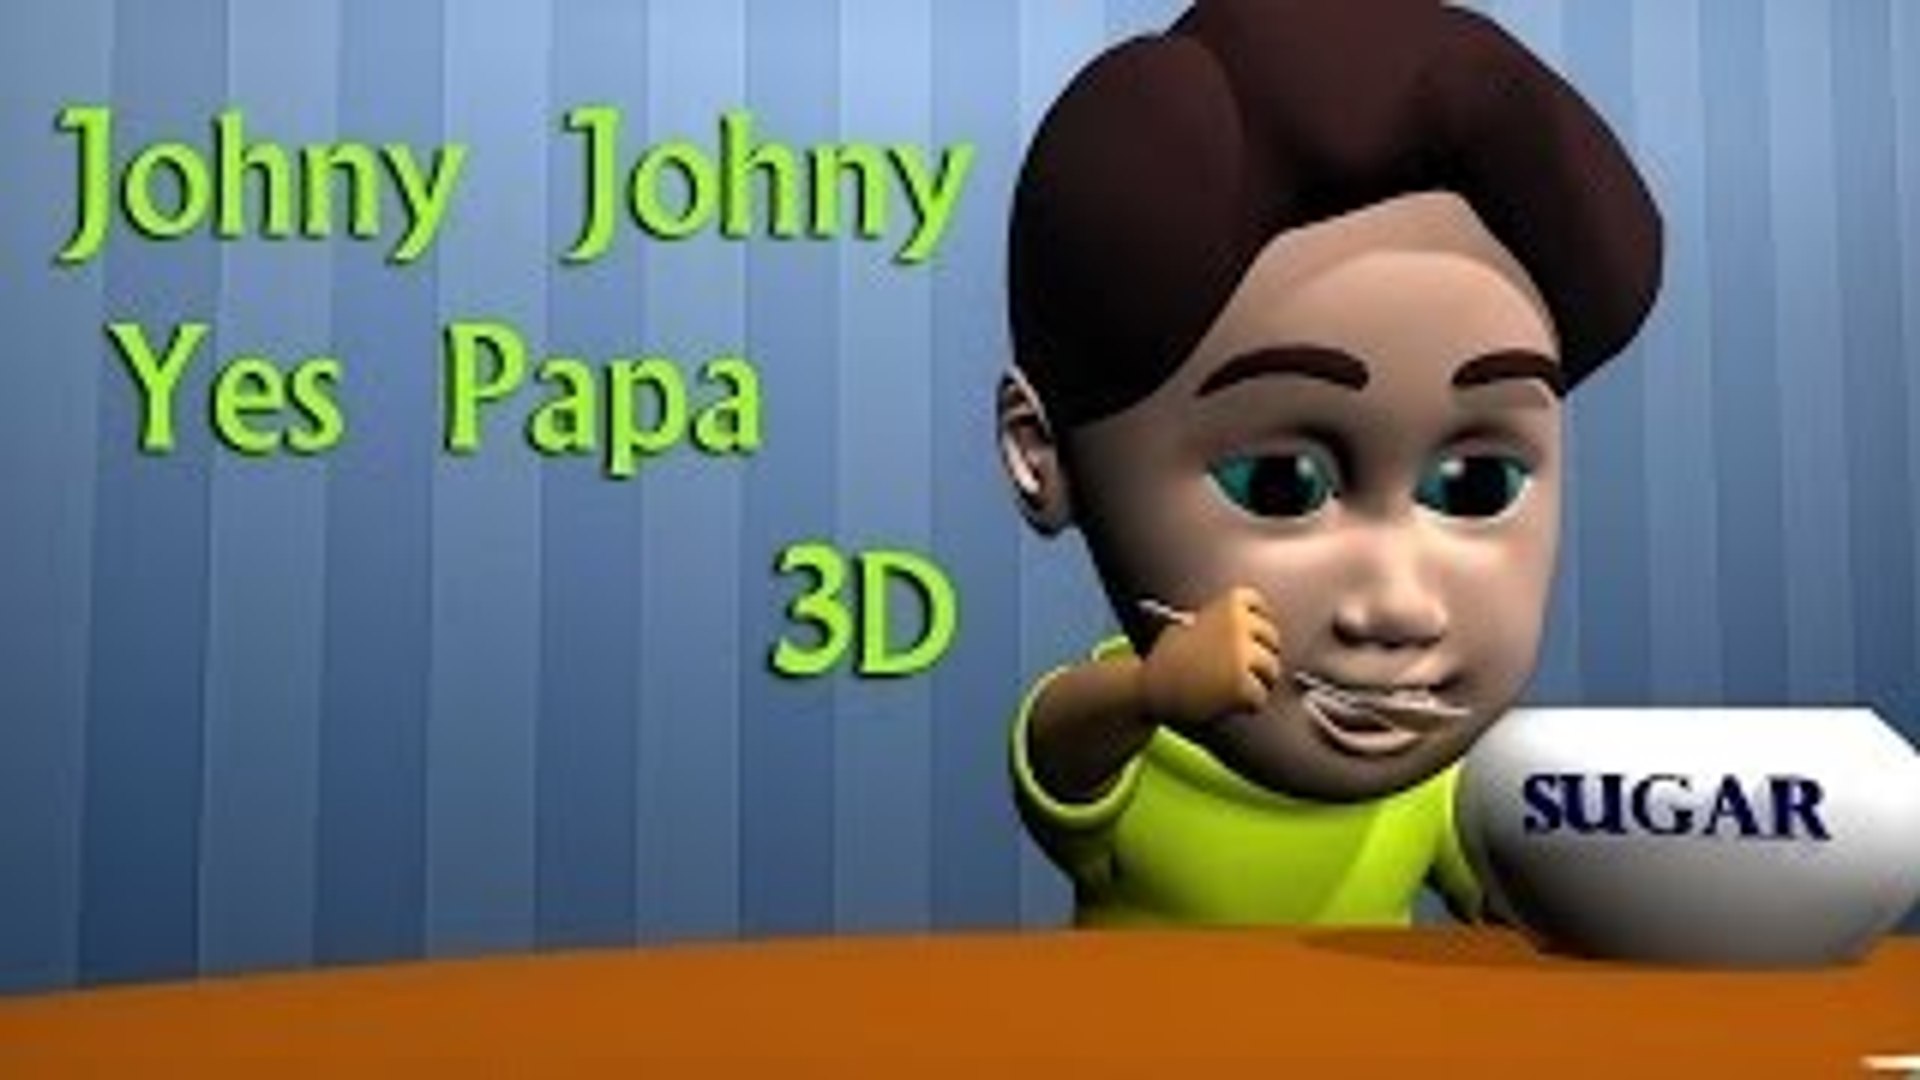 Johny Johny Yes Papa Cartoon Poem 3d 3d Animated English Nursery Rhymes For Kids With Ly Video Dailymotion